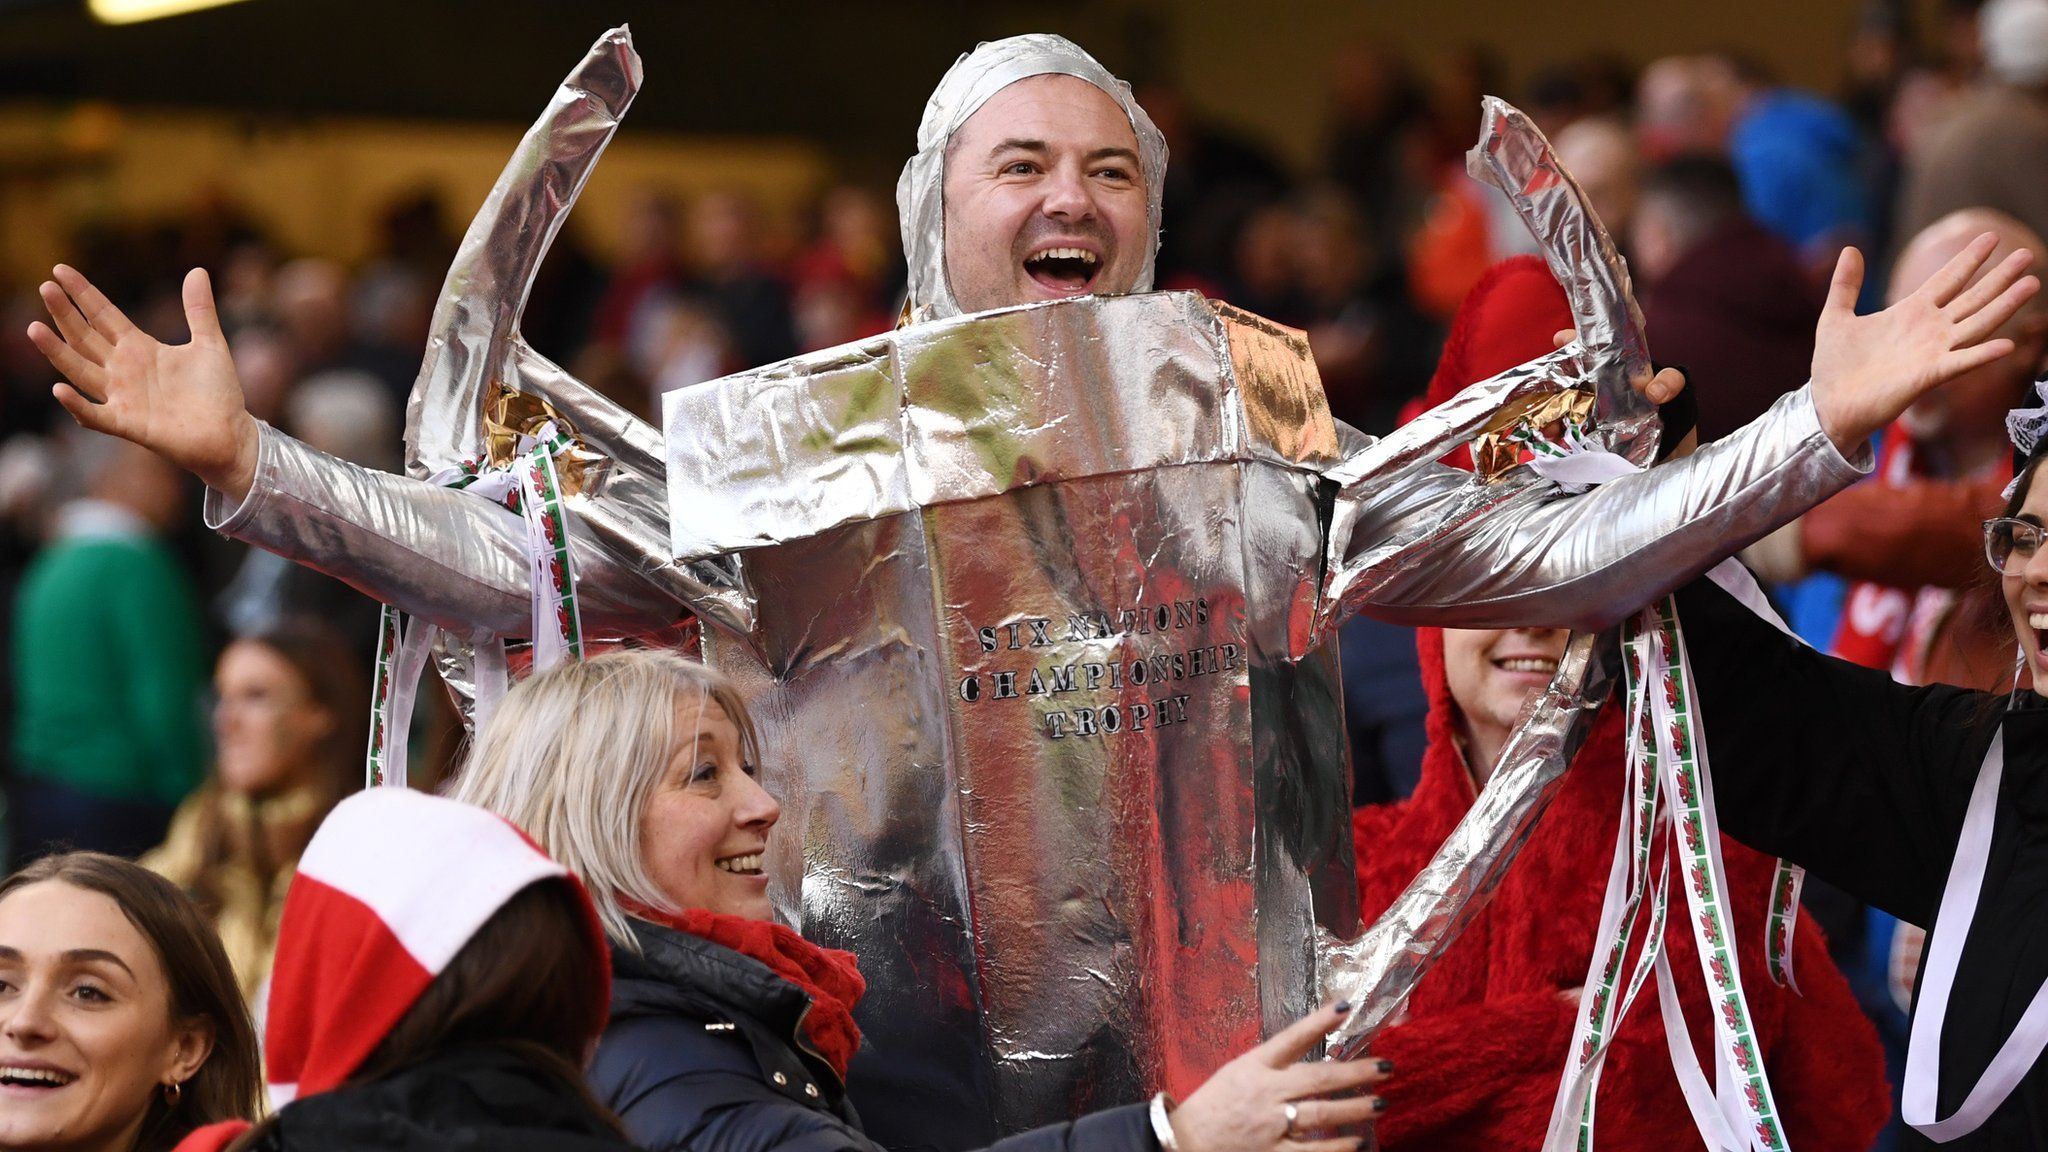 A Wales fan celebrates after Wales' Grand Slam win, dressed as the Six Nations trophy